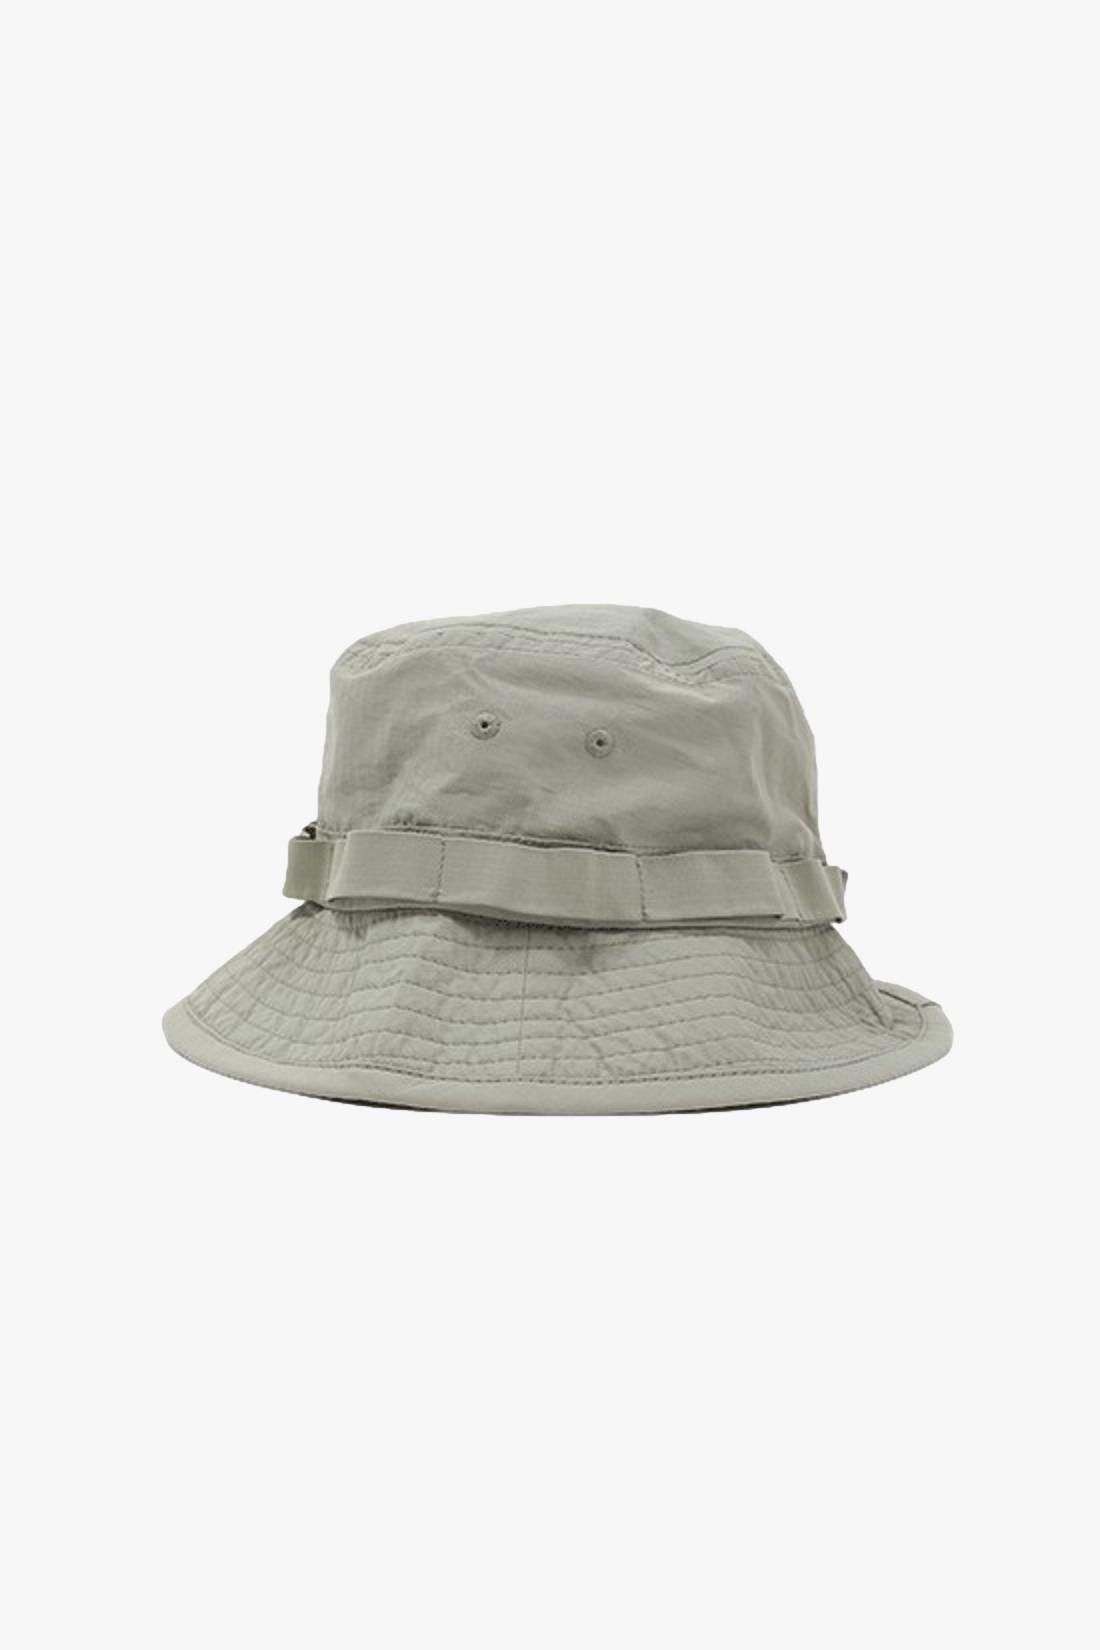 STUSSY / Nyco ripstop boonie hat Sage